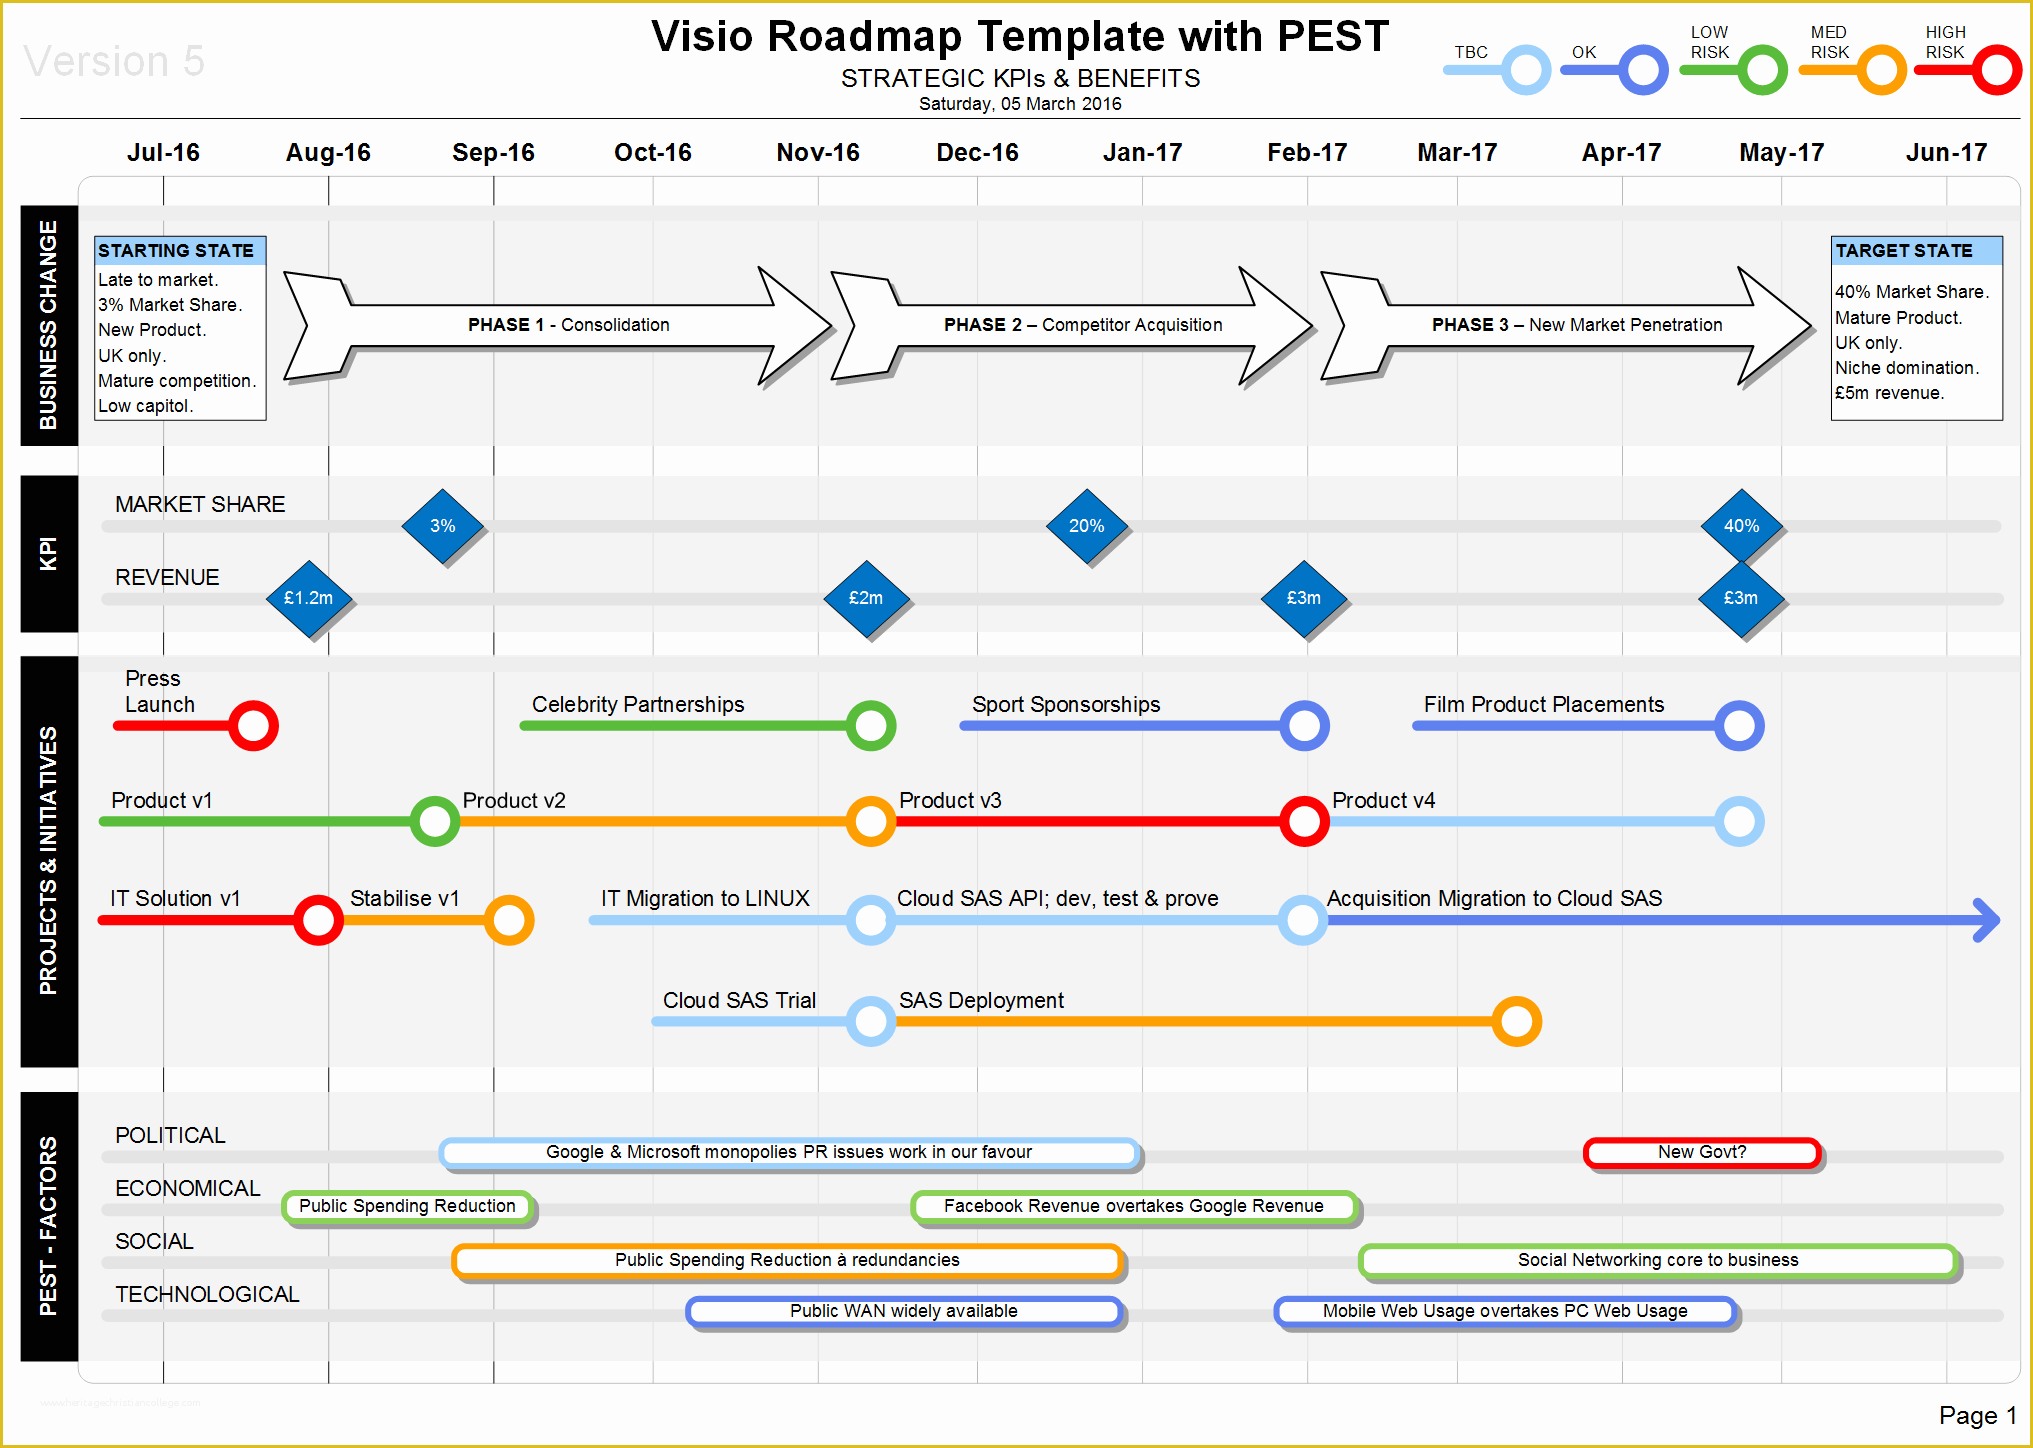 Free Marketing Roadmap Template Of Roadmap with Pest Strategic Insights